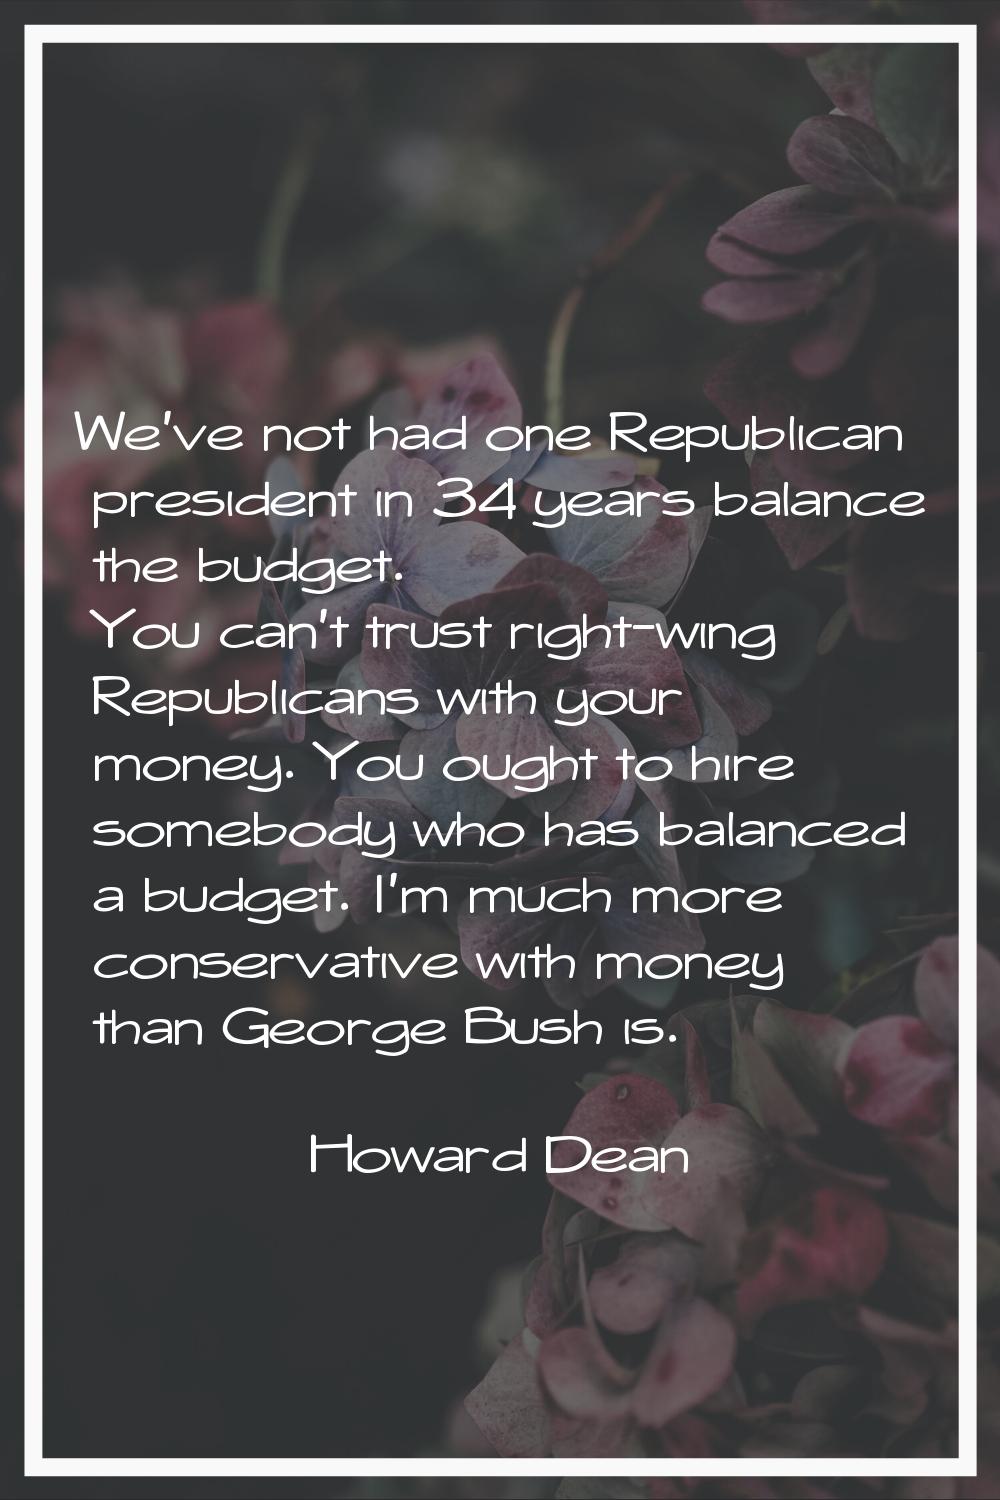 We've not had one Republican president in 34 years balance the budget. You can't trust right-wing R